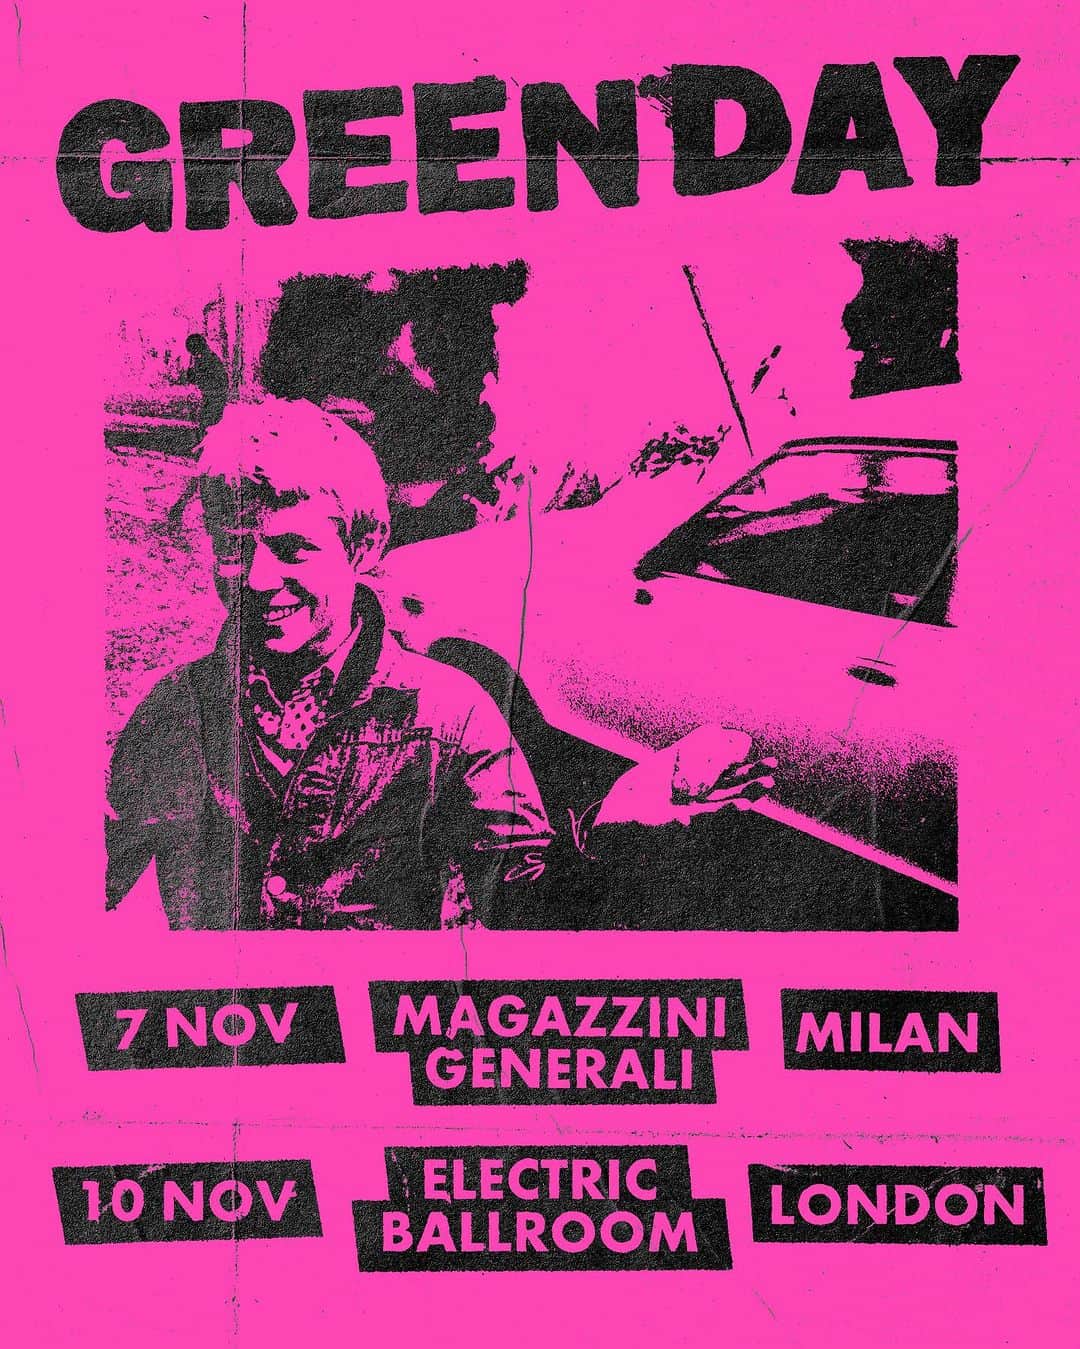 Green Dayのインスタグラム：「Paris, whatta show!! We’re not stopping anytime soon. MILAN AND LONDON, you’re next on the Hella Tiny Tour!! Got two very special shows coming up for you this week 👋🏼👋🏼   Milan - 7 Novembre @ Magazzini Generali On sale tomorrow at 10am local (link in story) 2 ticket limit - all ages show   London - 10 November @ Electric Ballroom  Tickets are only available by request (link in story). Request your tickets before 10:00am tomorrow, Monday 6th November. 2 ticket limit - 14+ // under 16s to be accompanied by an adult」